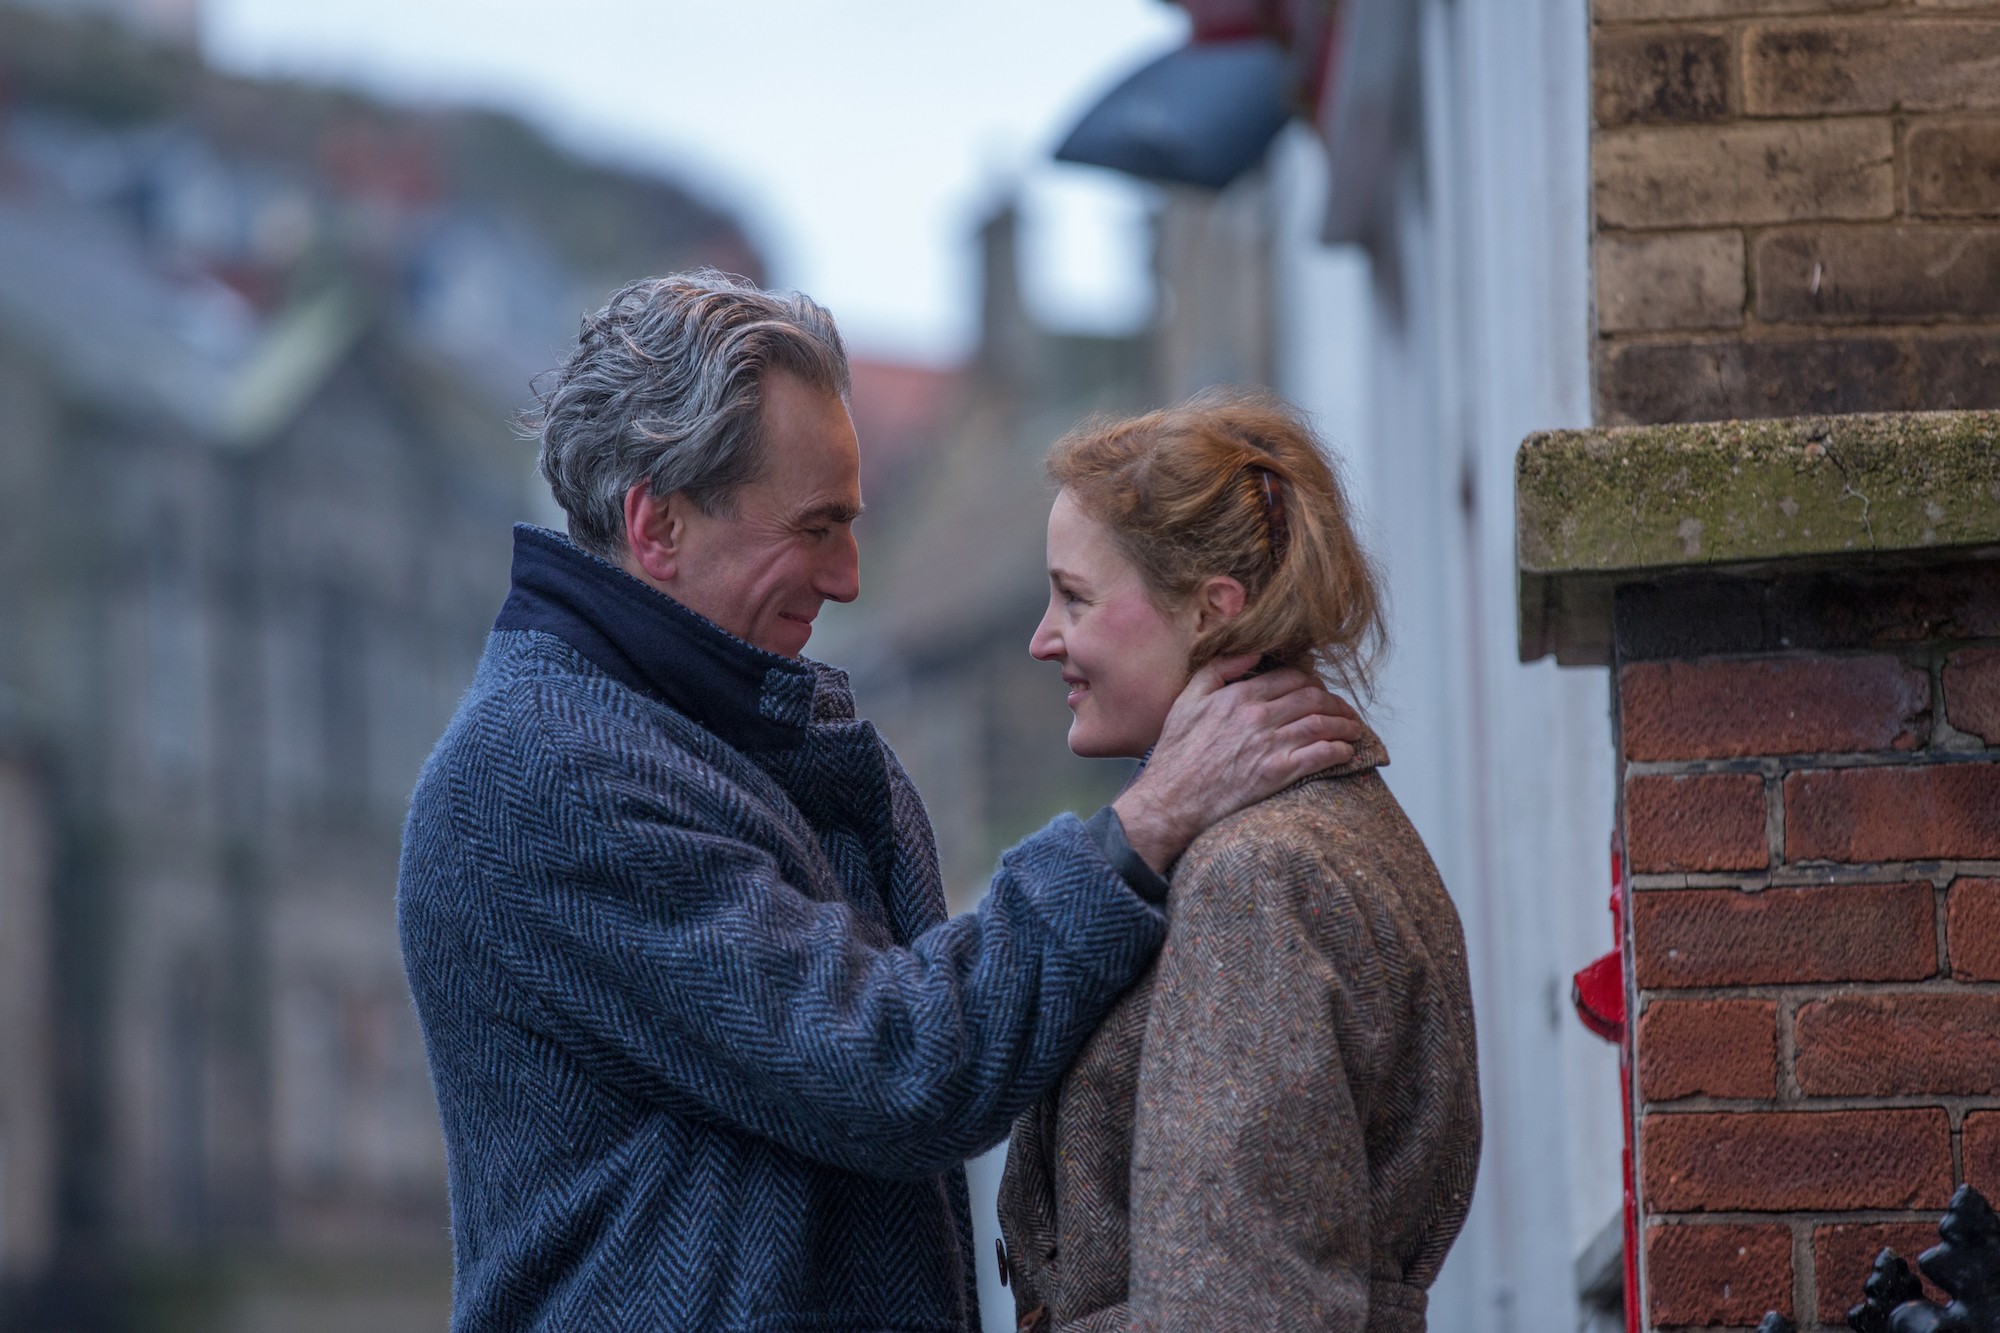 Dissecting the Twisted Relationship in Phantom Thread